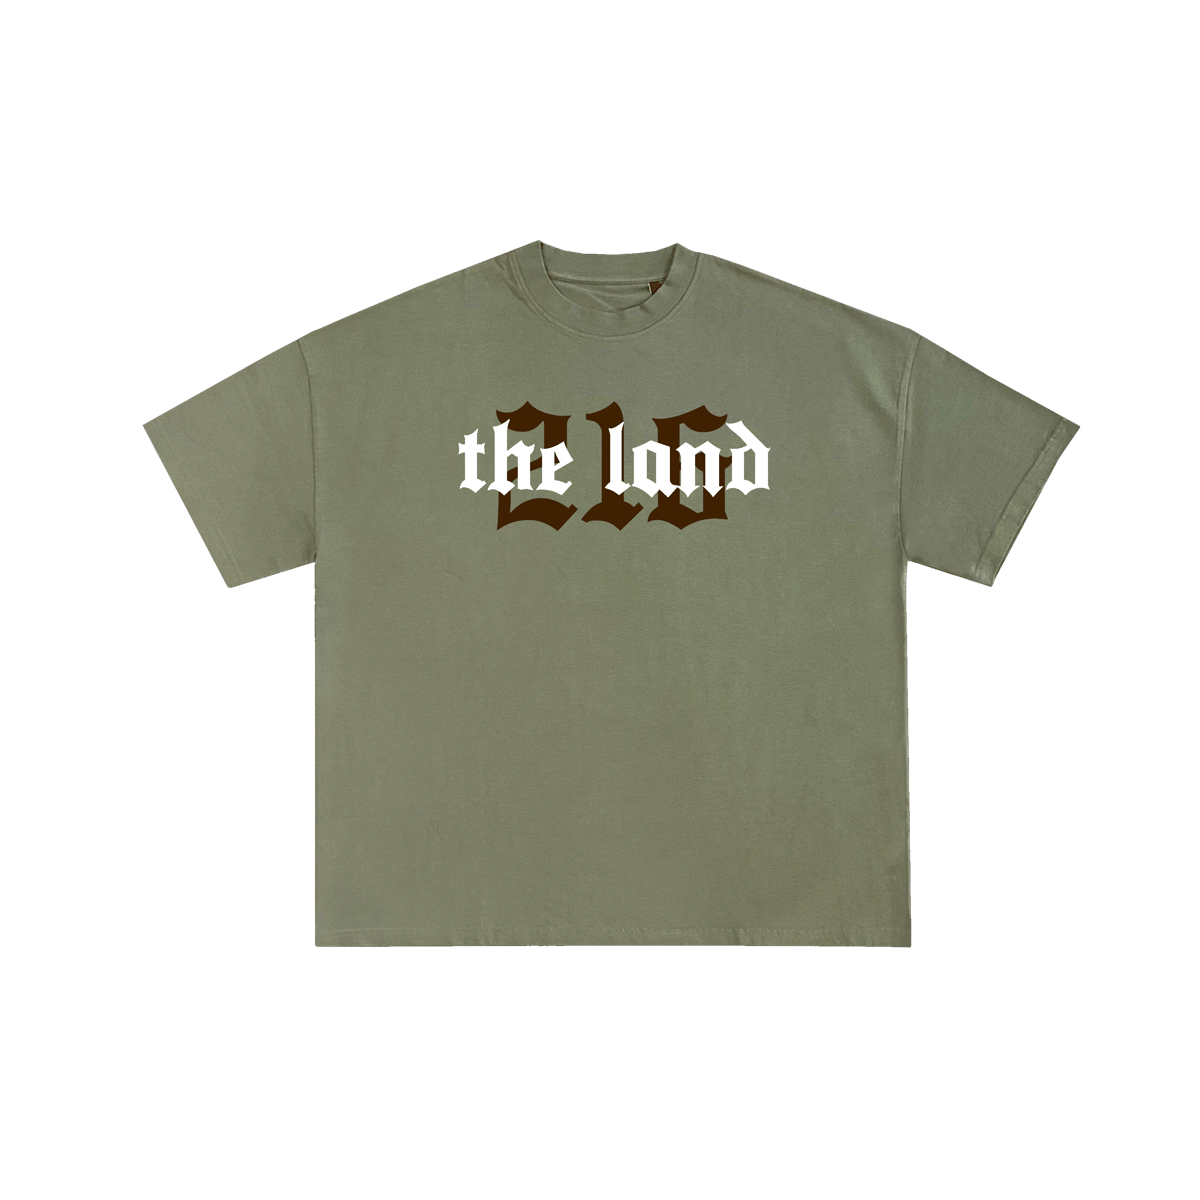 The Land 216 Collection Green T-shirt